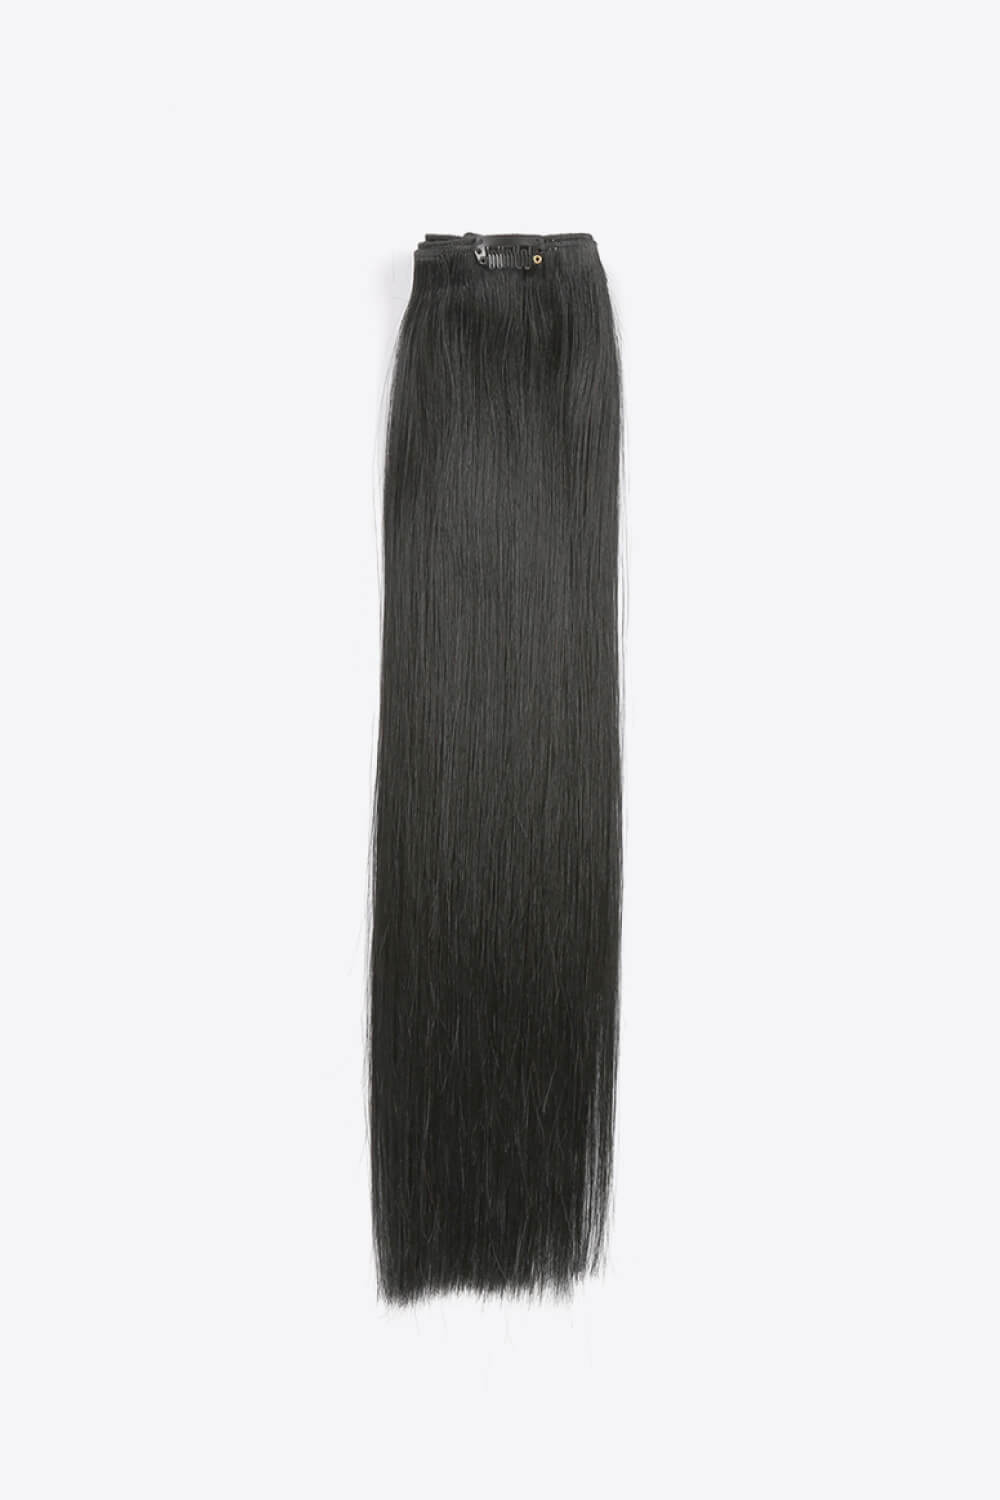 20" 100g Clip-in Hair Extensions Indian Human Hair